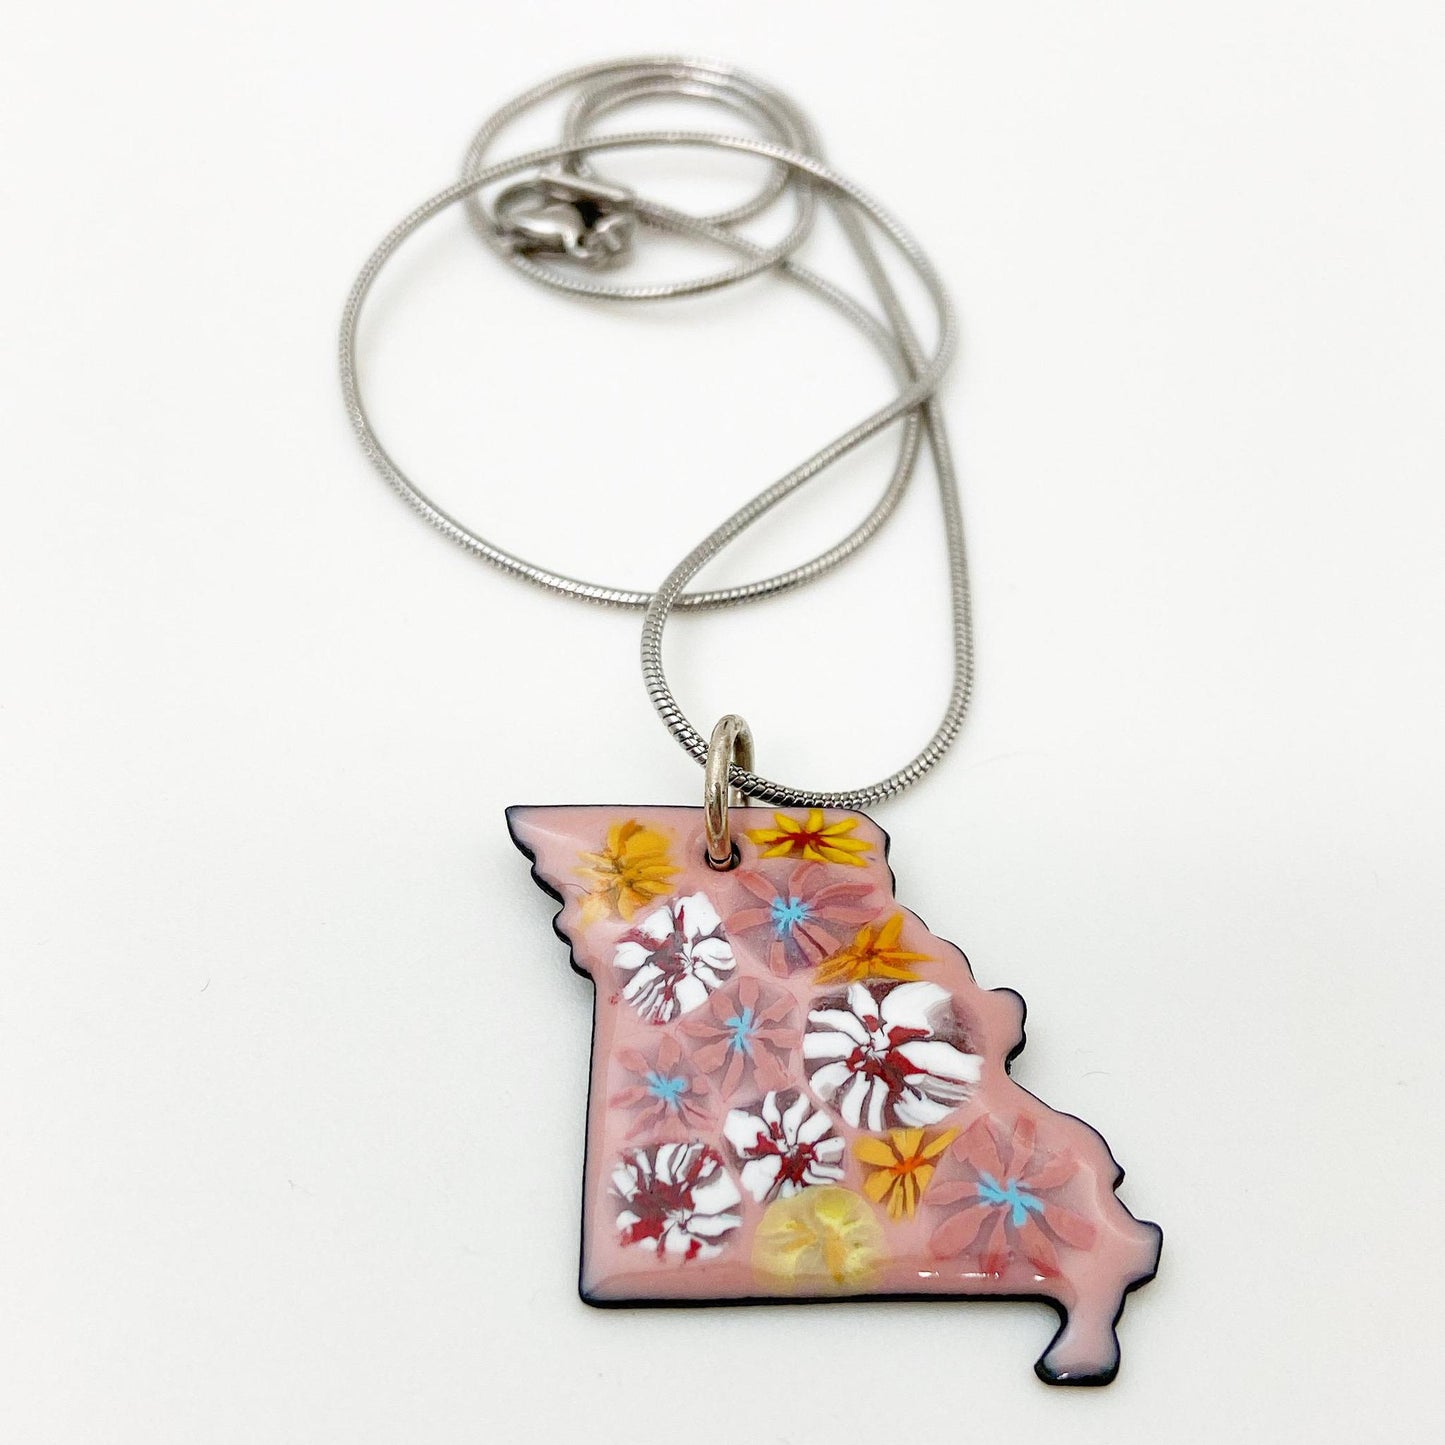 Necklace - Missouri Shape with Wildflowers on Pink - Enamel on Copper